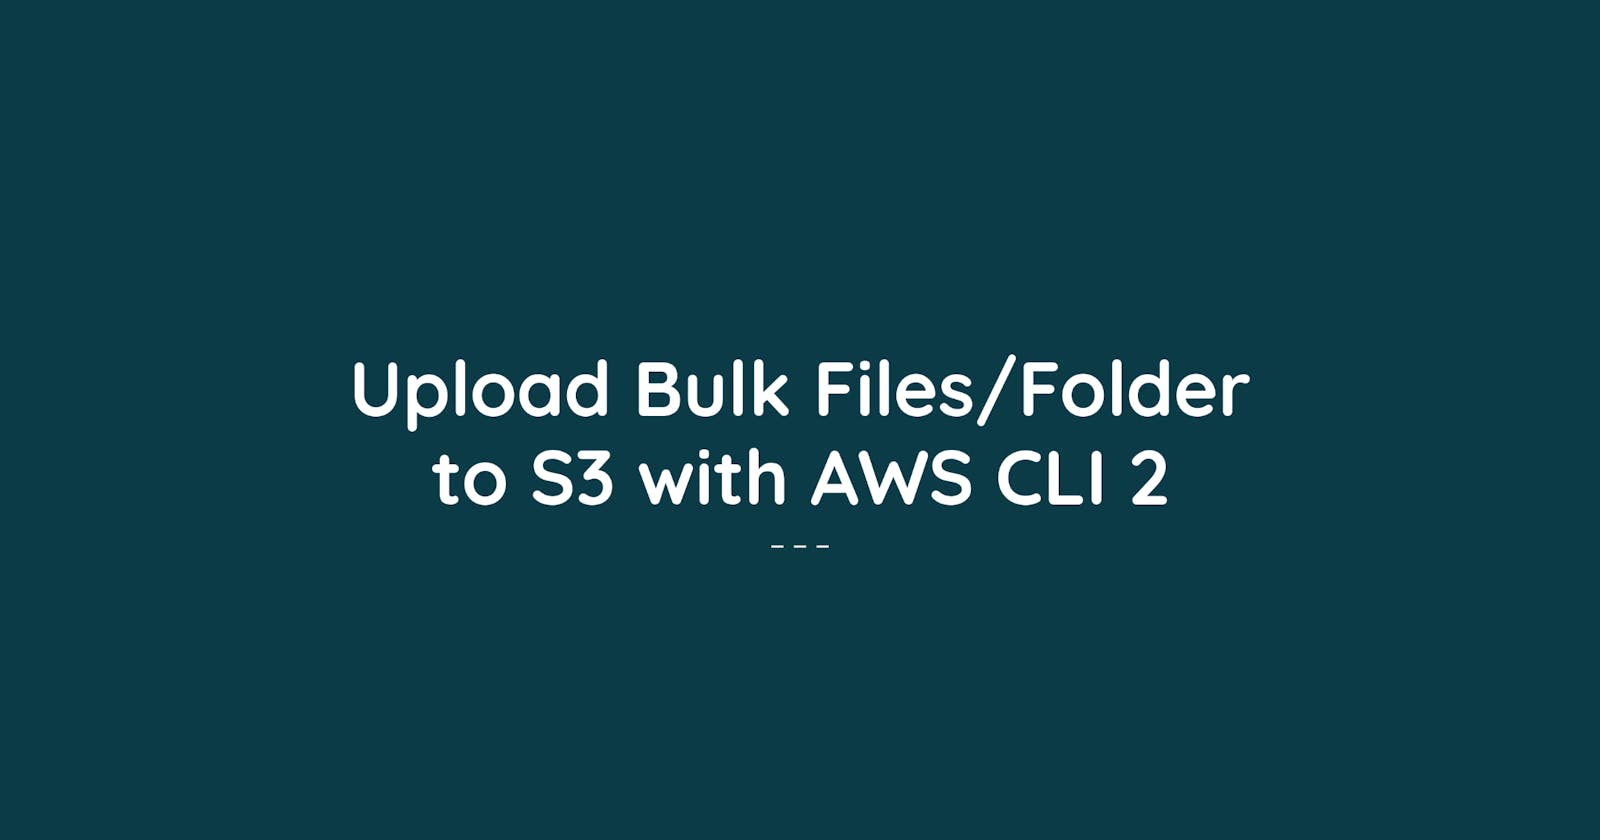 Upload files and folder to S3 from Ubuntu 20.04 using AWS CLI 2